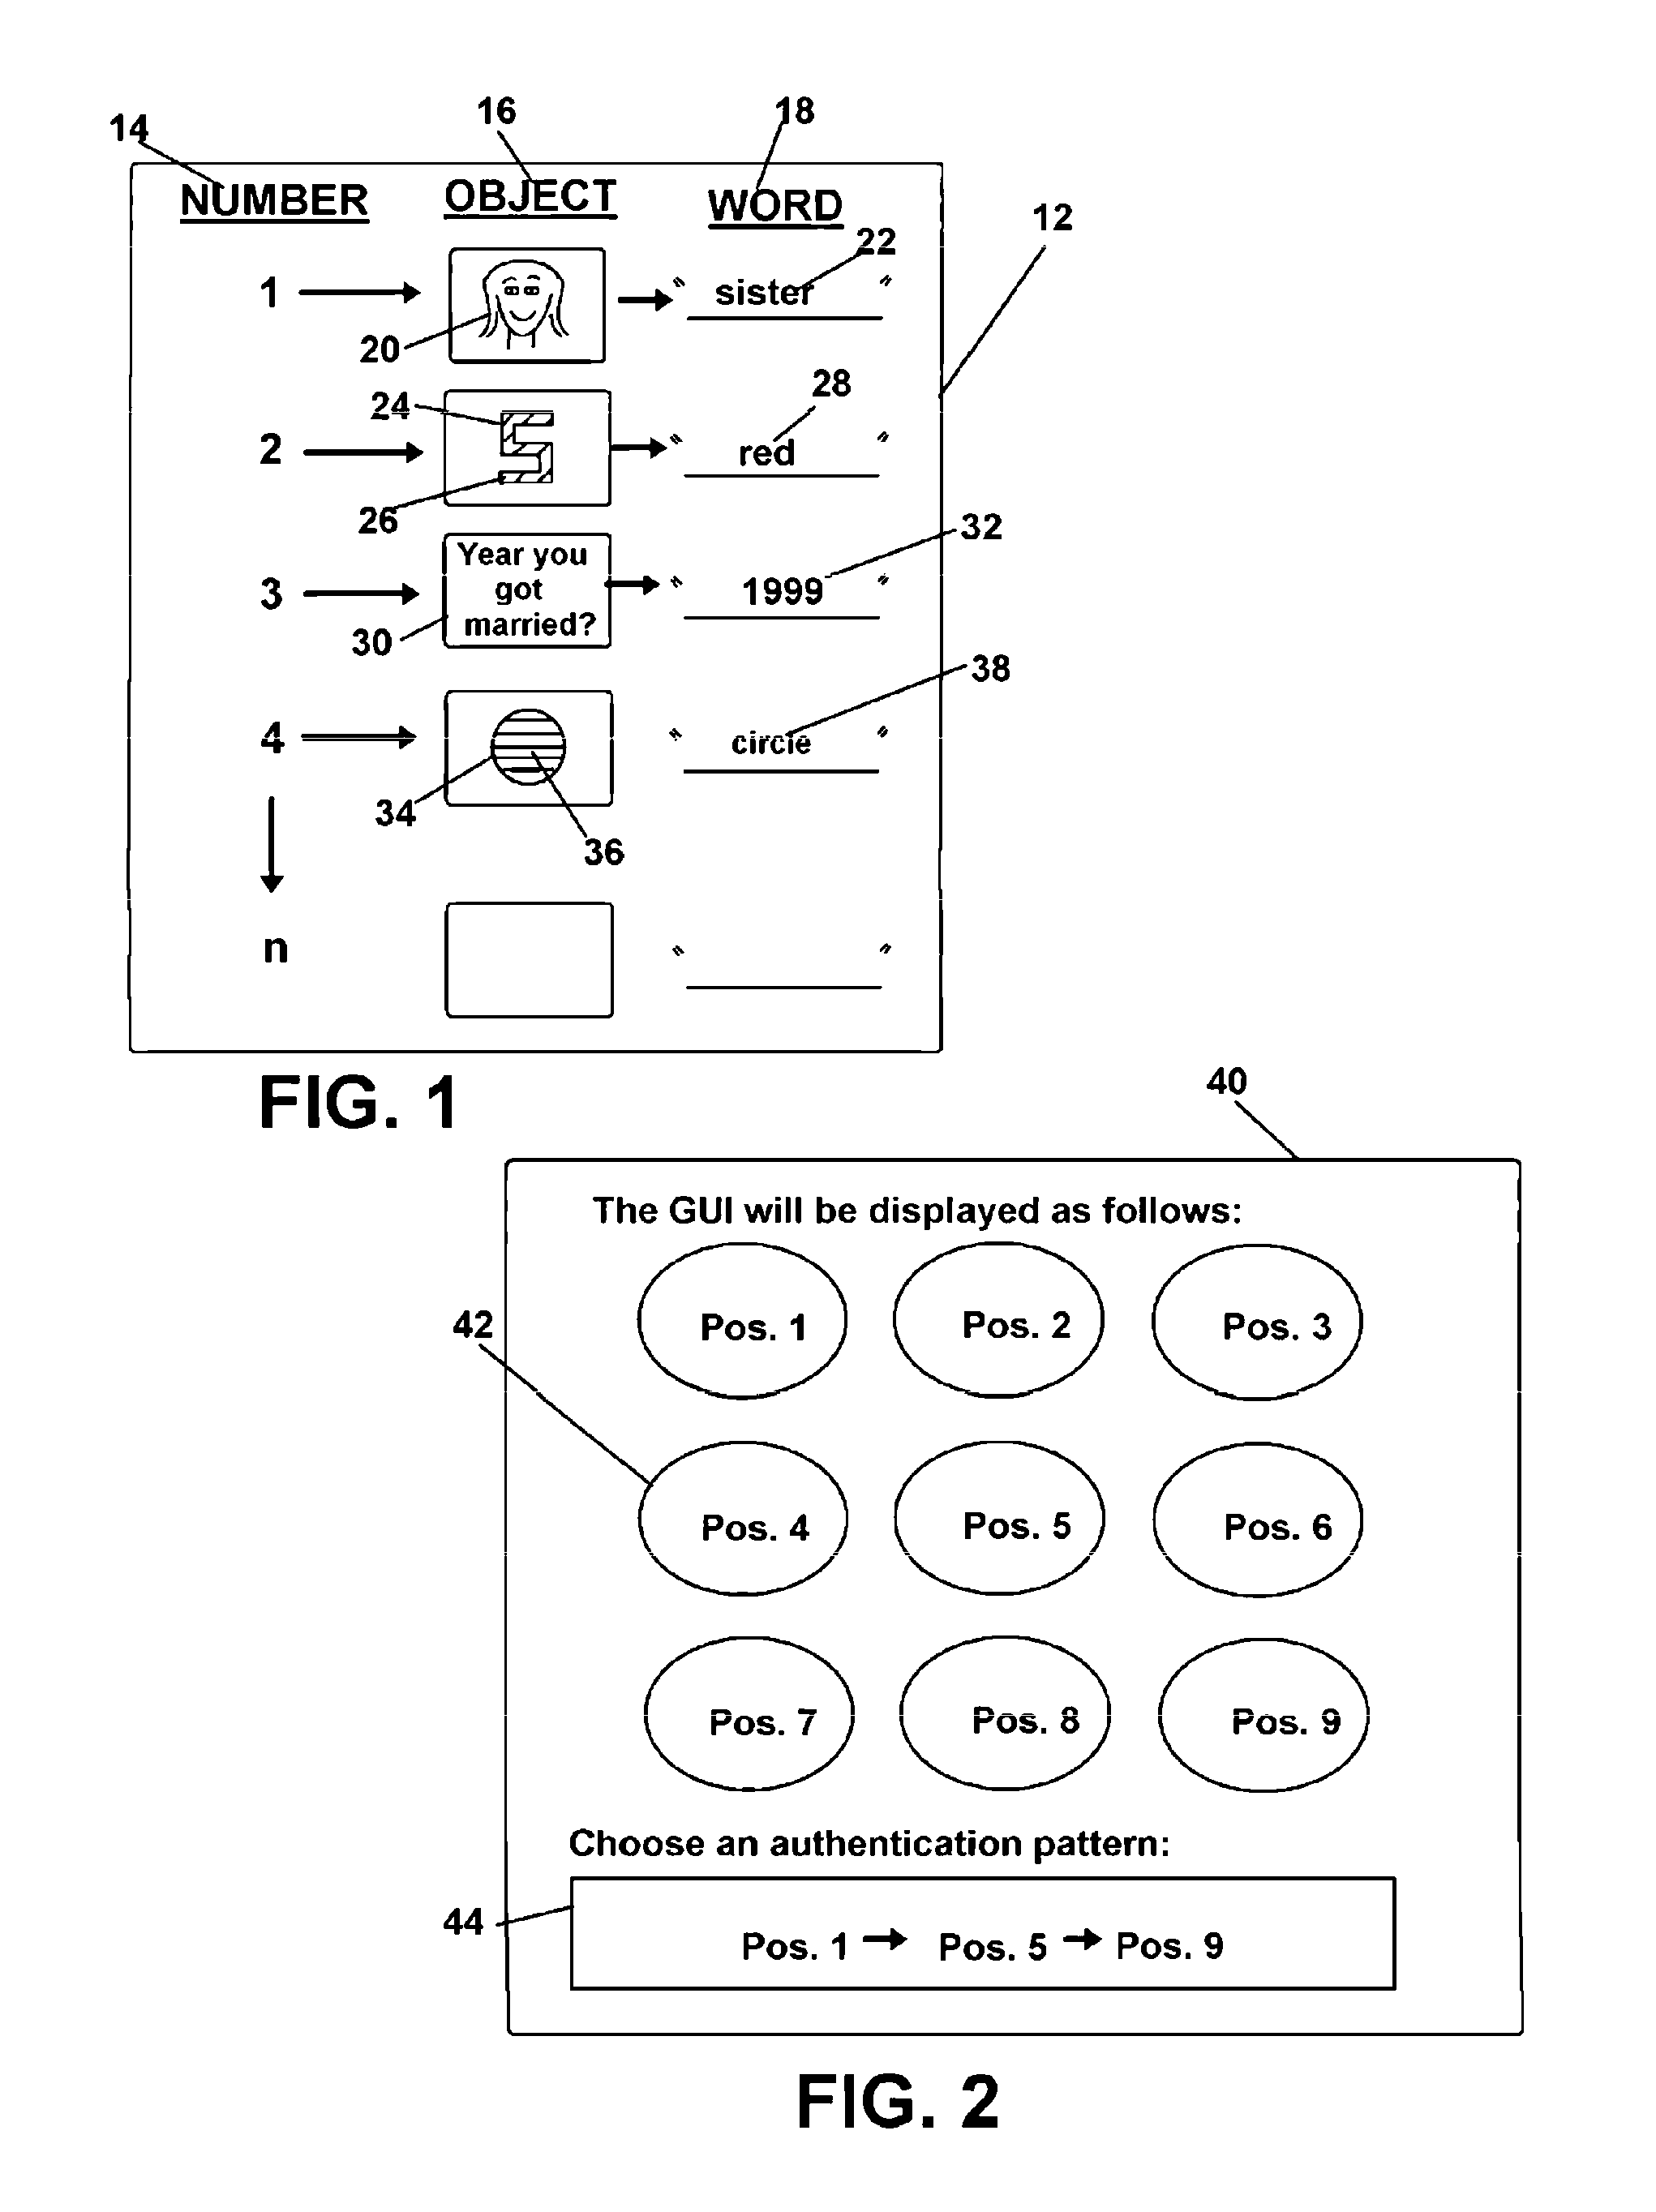 Method for producing dynamic data structures for authentication and/or password identification